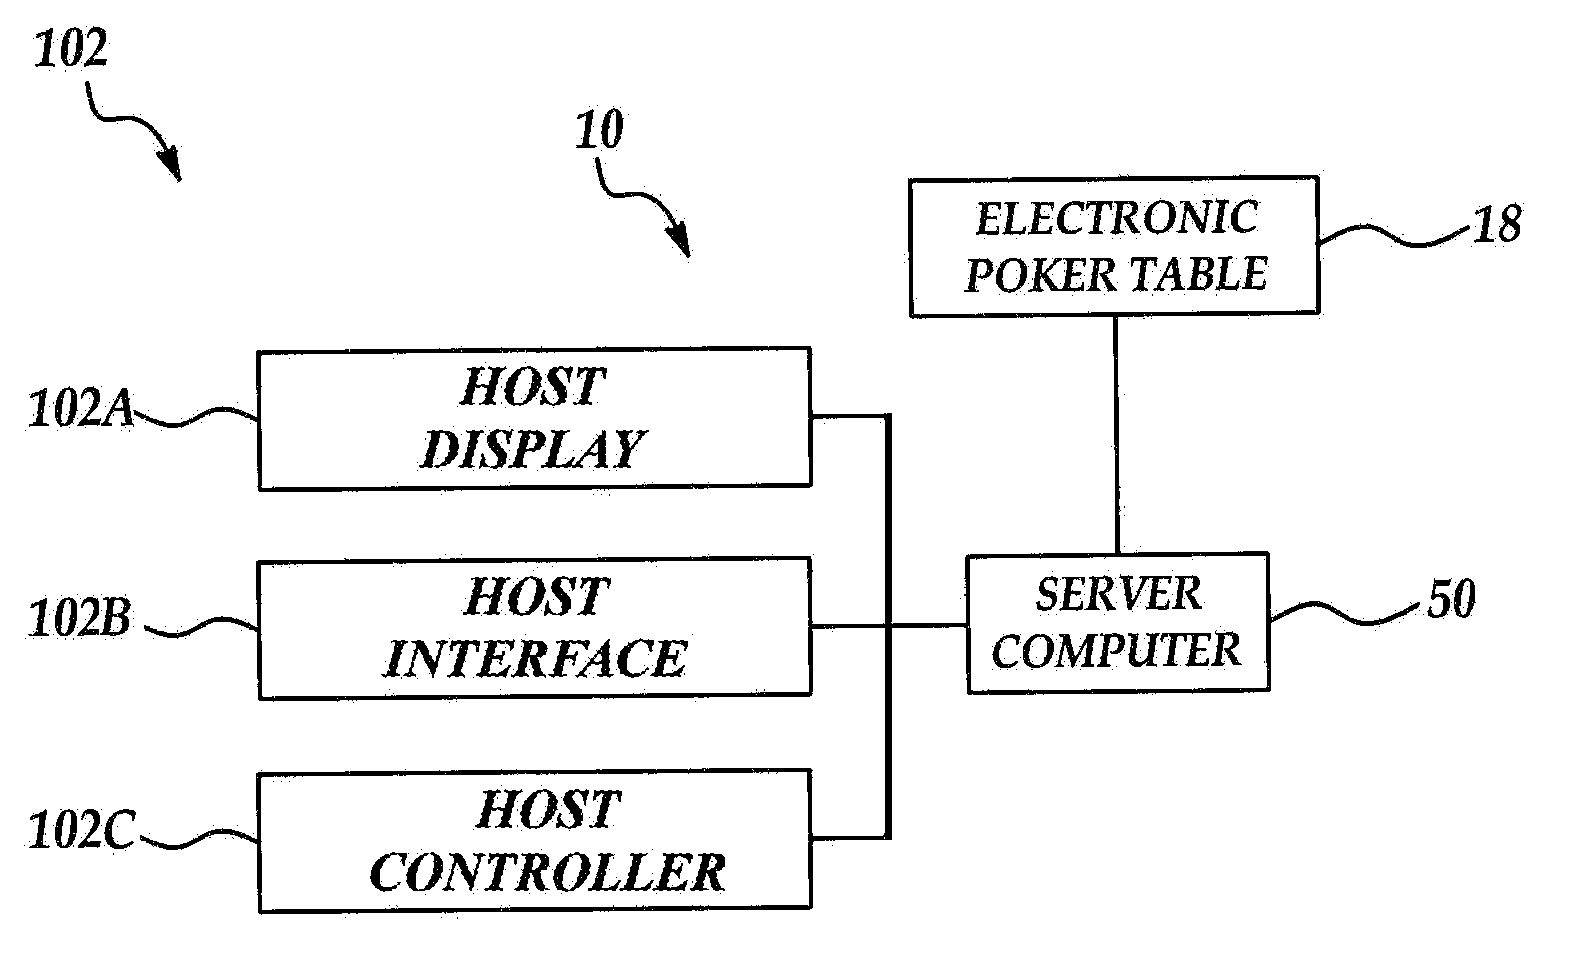 System and method for providing a host console for use with an electronic card game